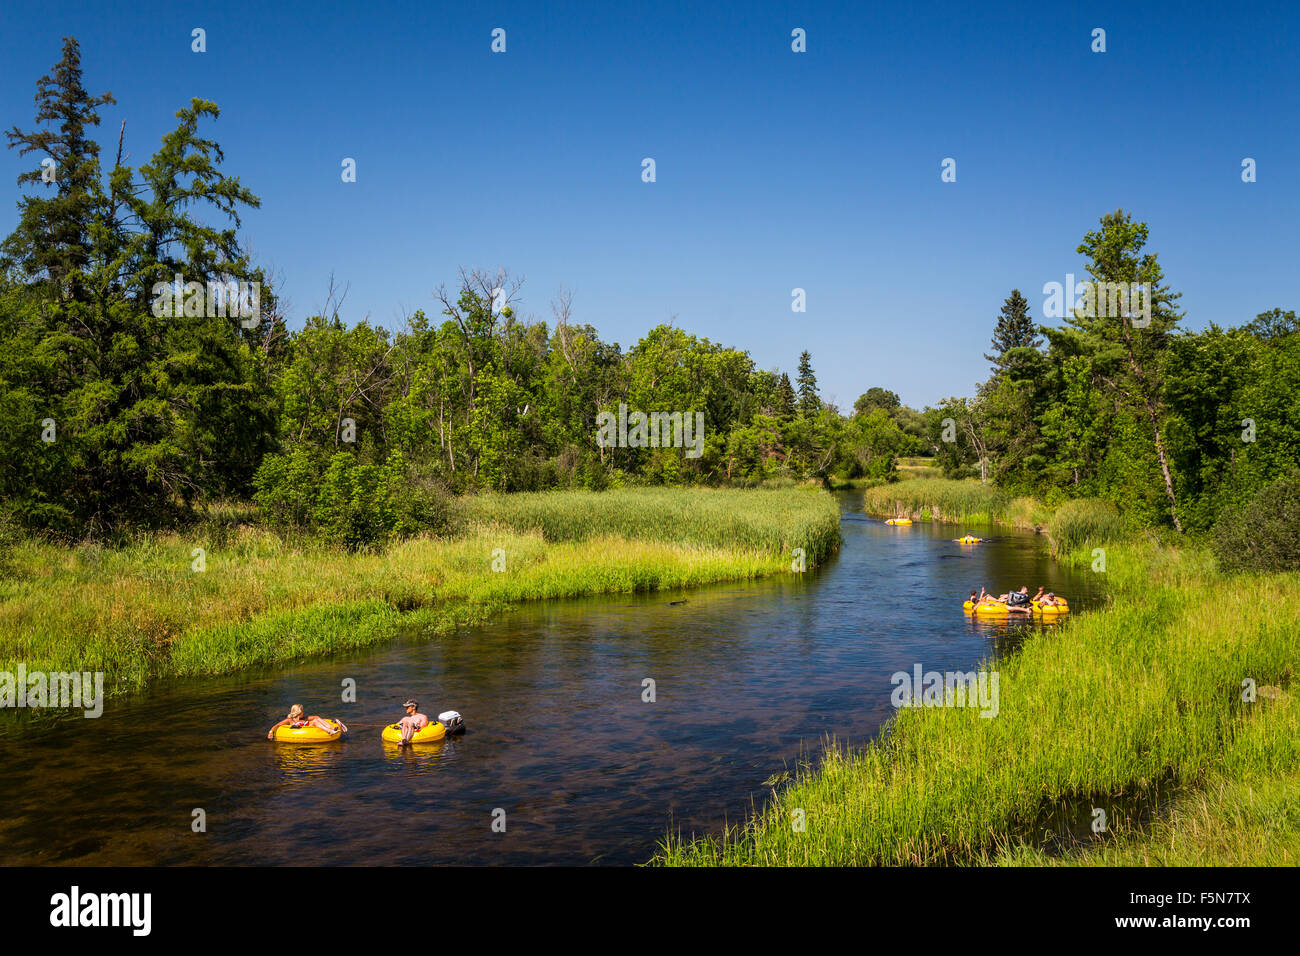 Tubing on the Otter-Tail River in Northern Minnesota, USA. Stock Photo